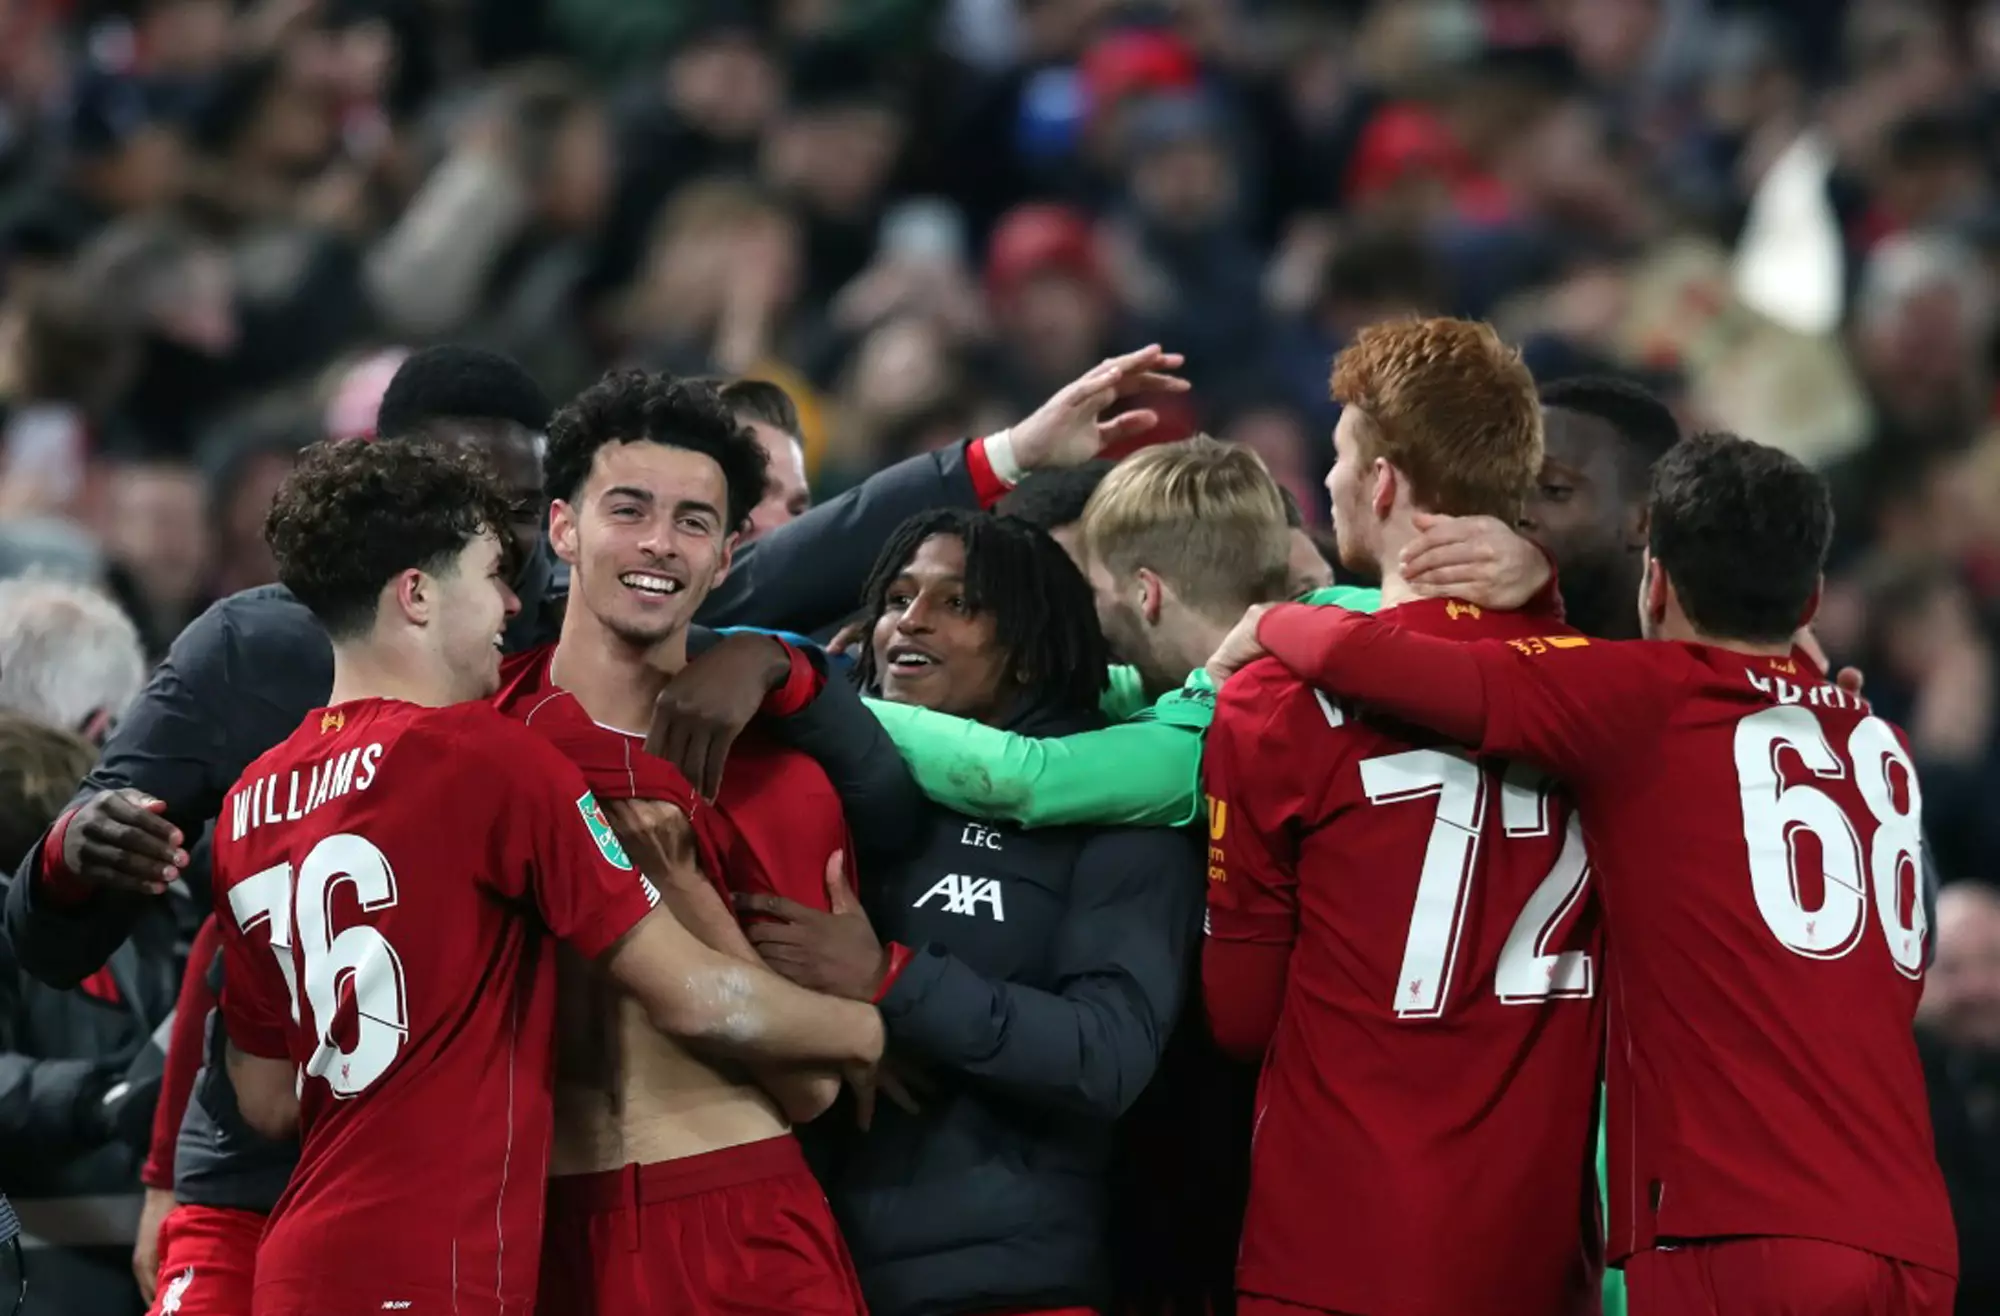 Liverpool celebrate after beating Arsenal 5-4 on penalties on Wednesday night. (Image